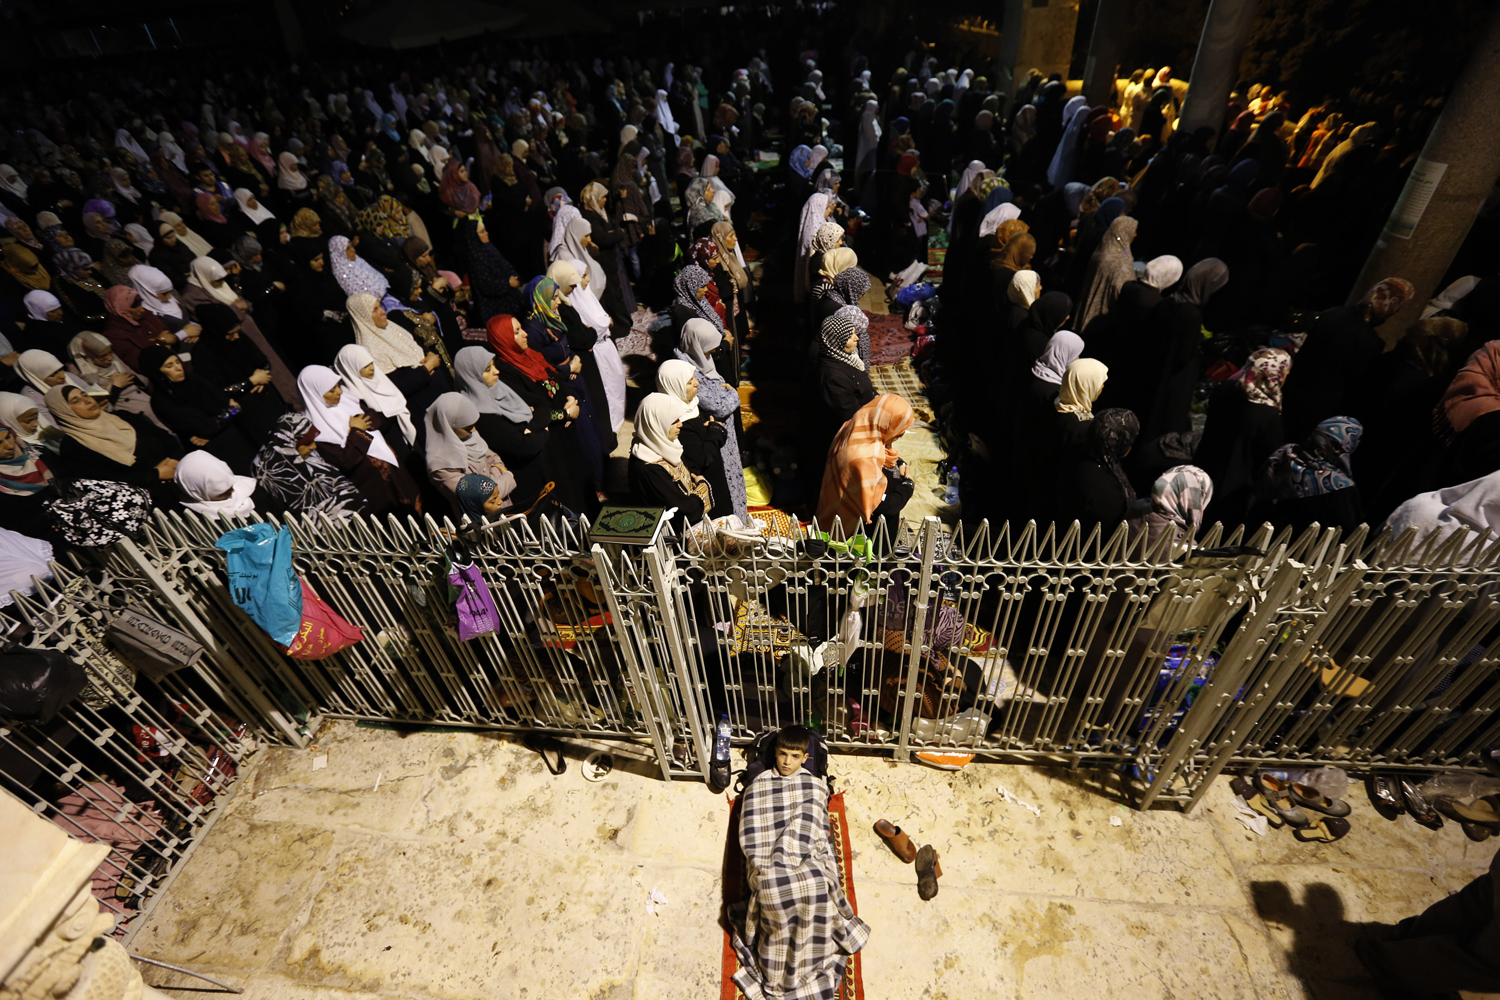 Female Palestinian worshippers pray in front of the Dome of the Rock, in the Al Aqsa Mosque compound in Jerusalem